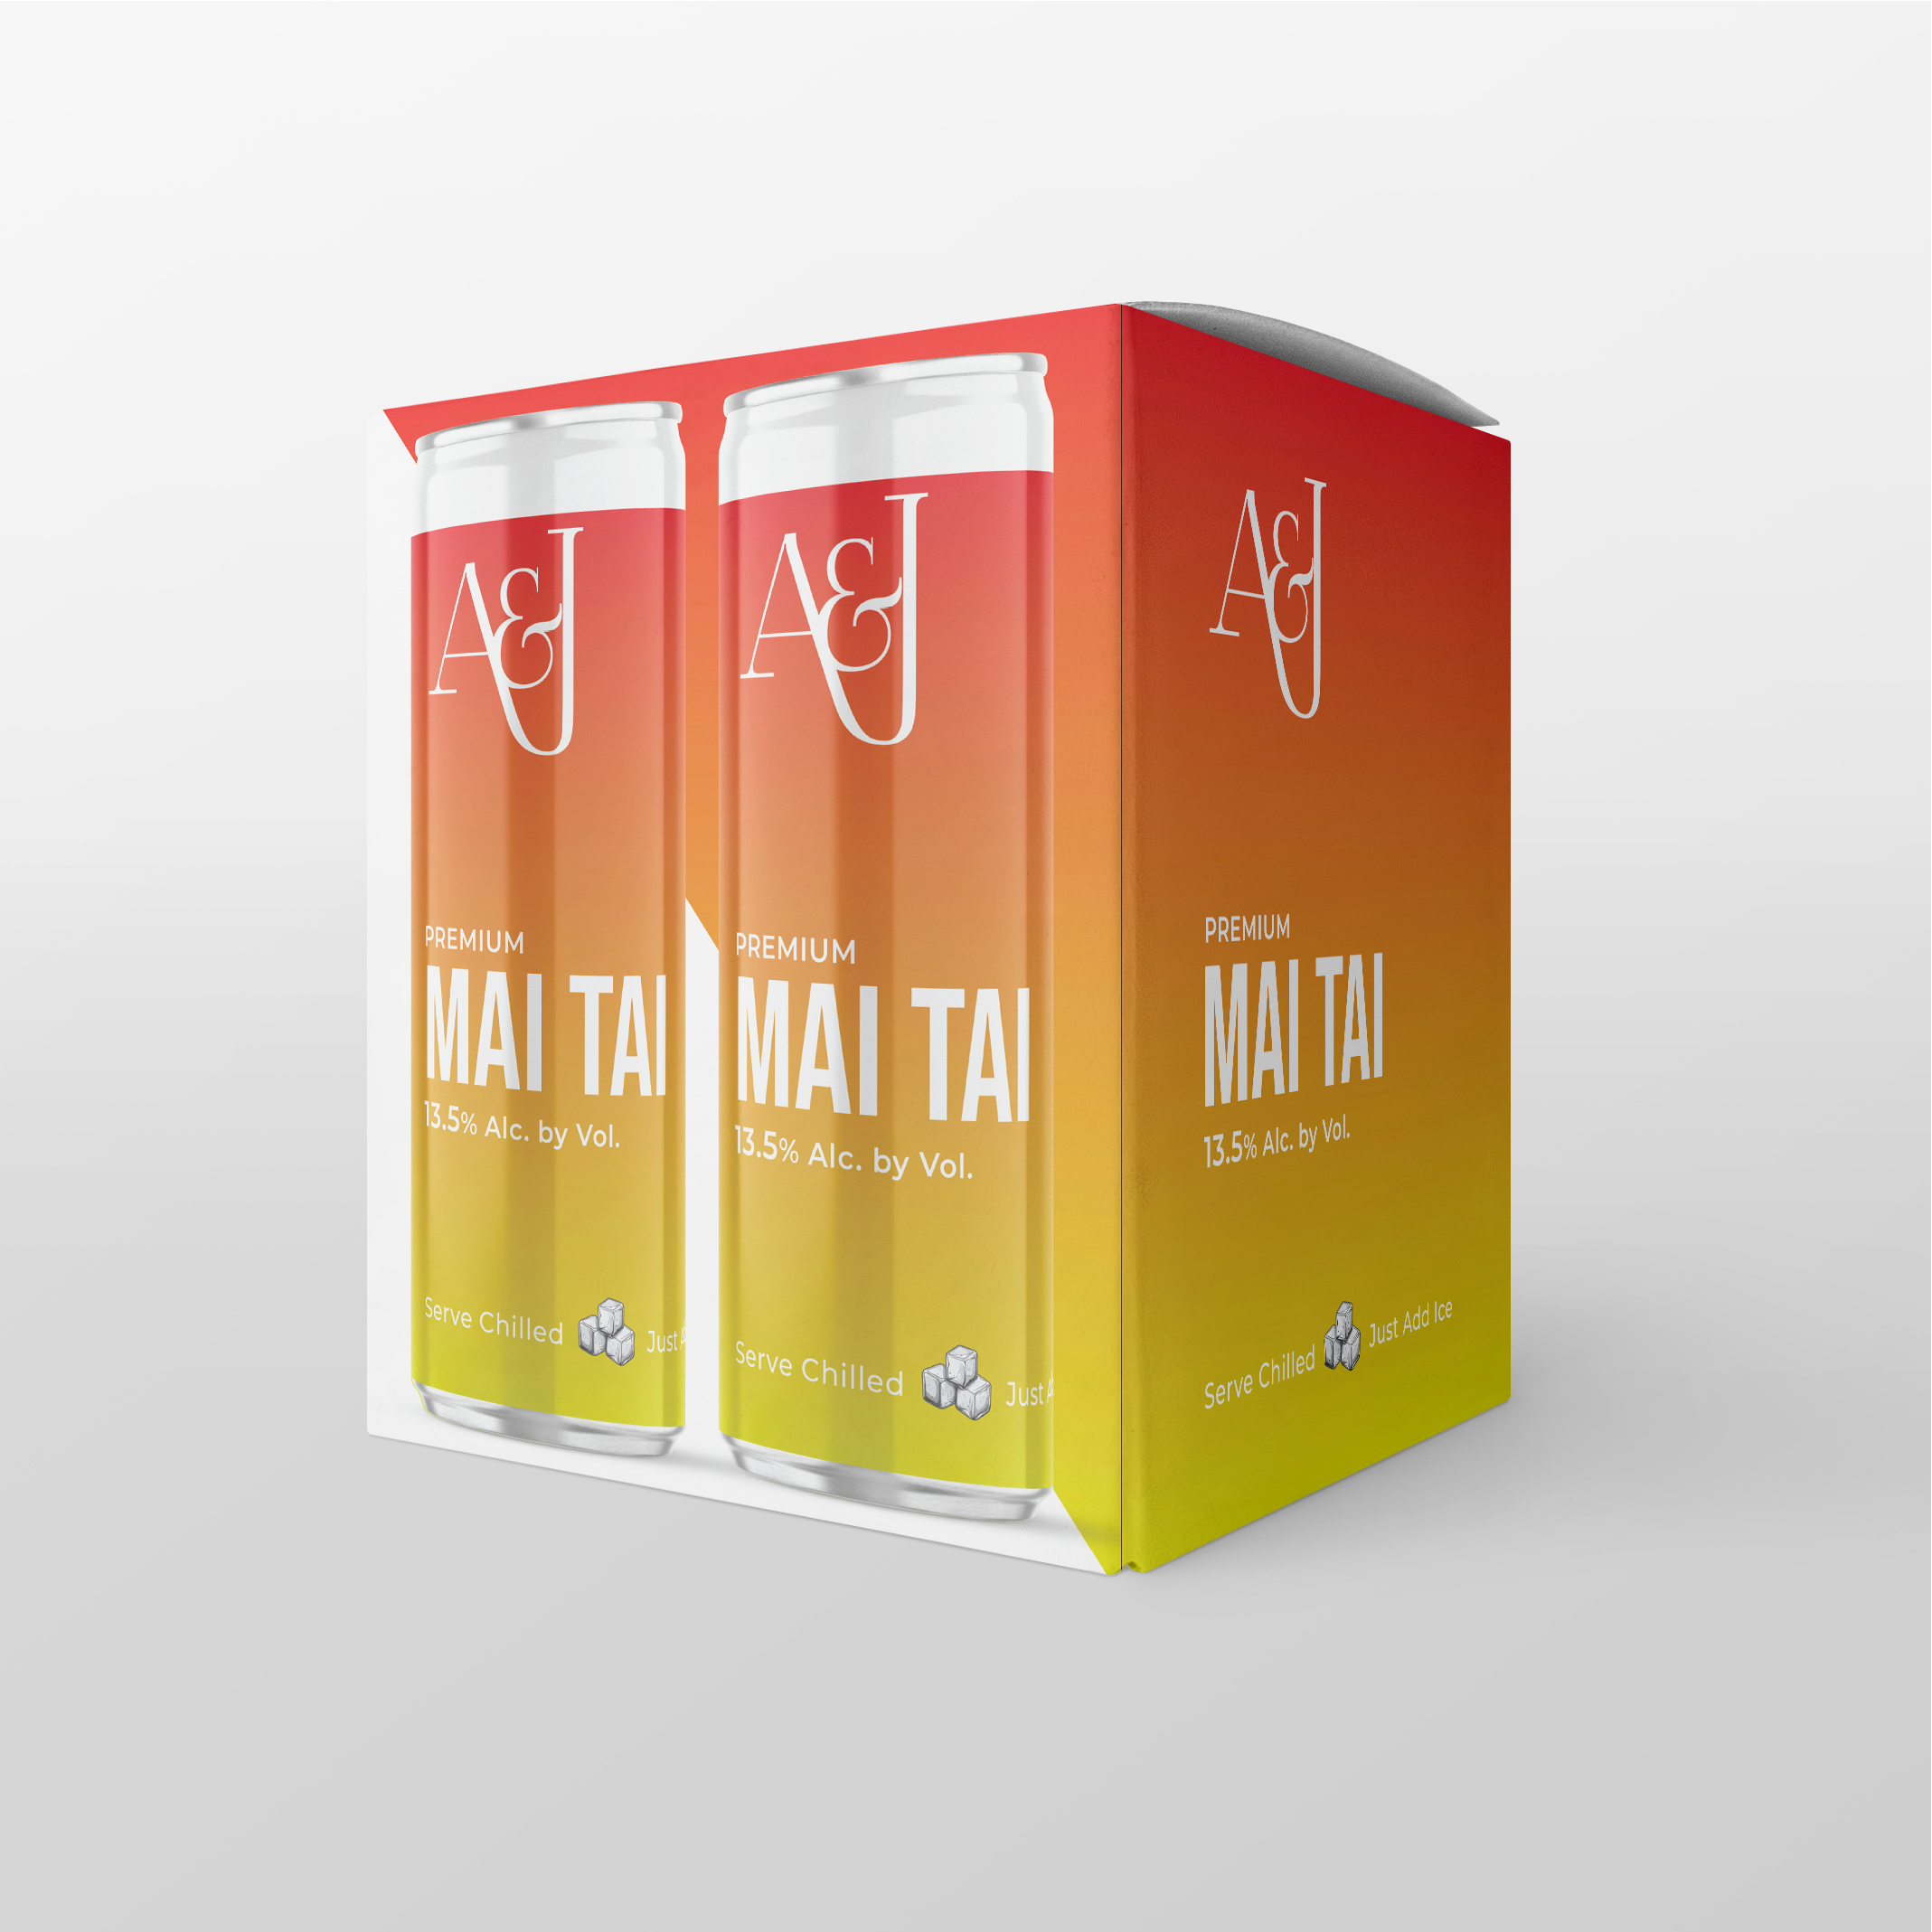 Product Image for MAI TAI WINE COCKTAIL 4 PACK